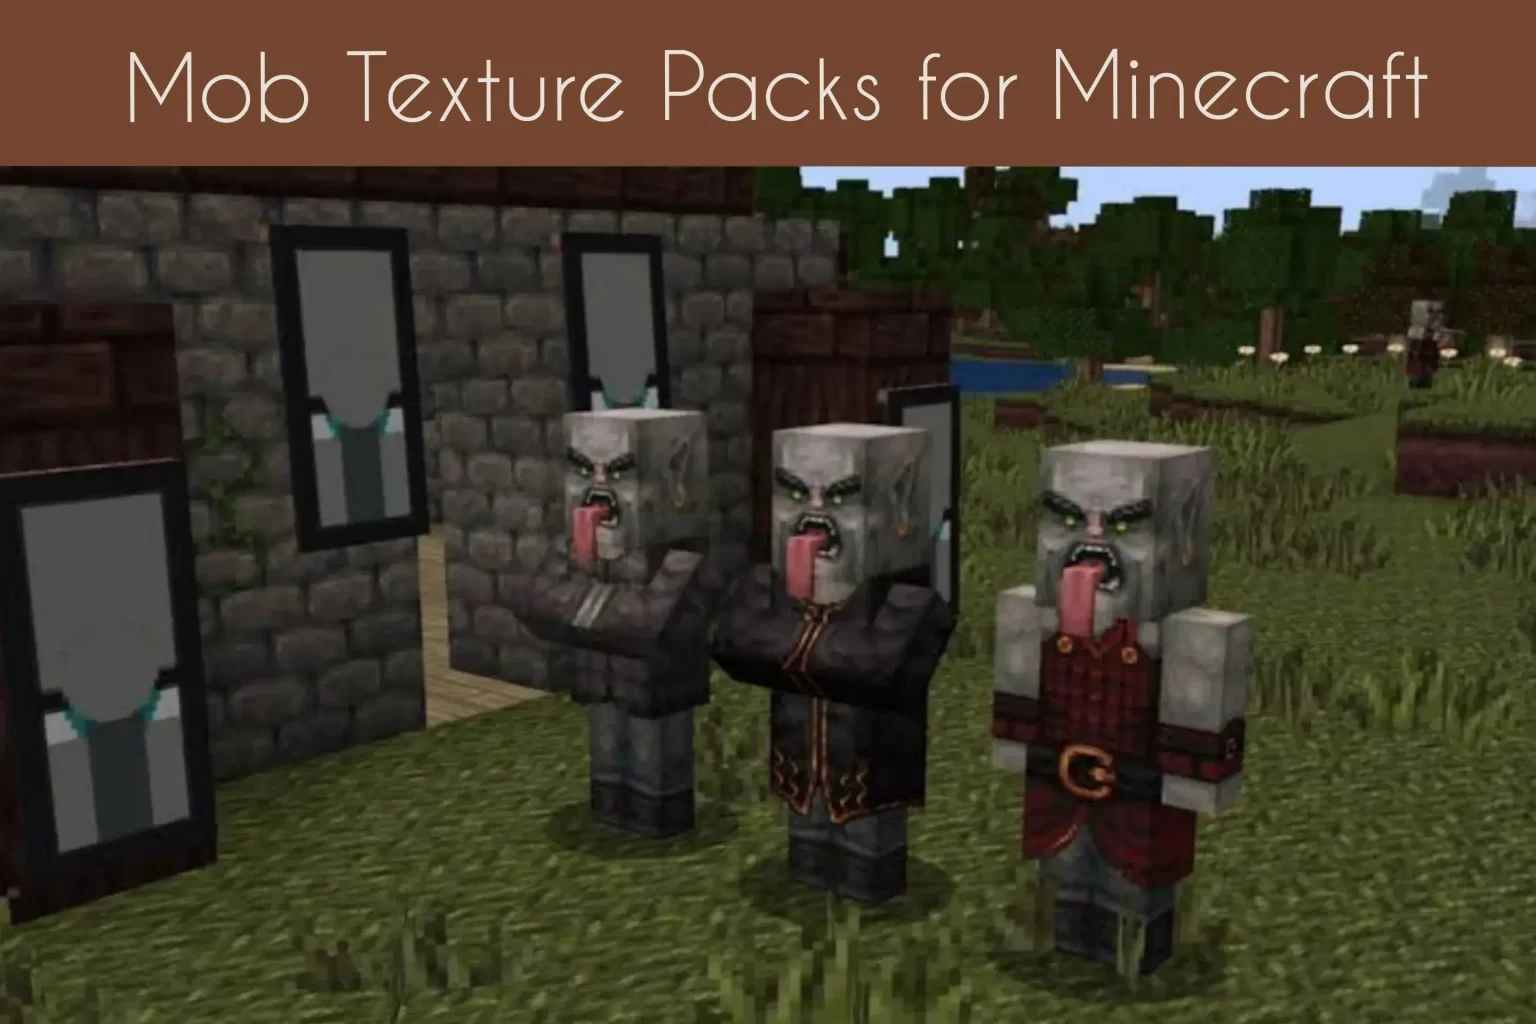 Mob Texture Packs for Minecraft
